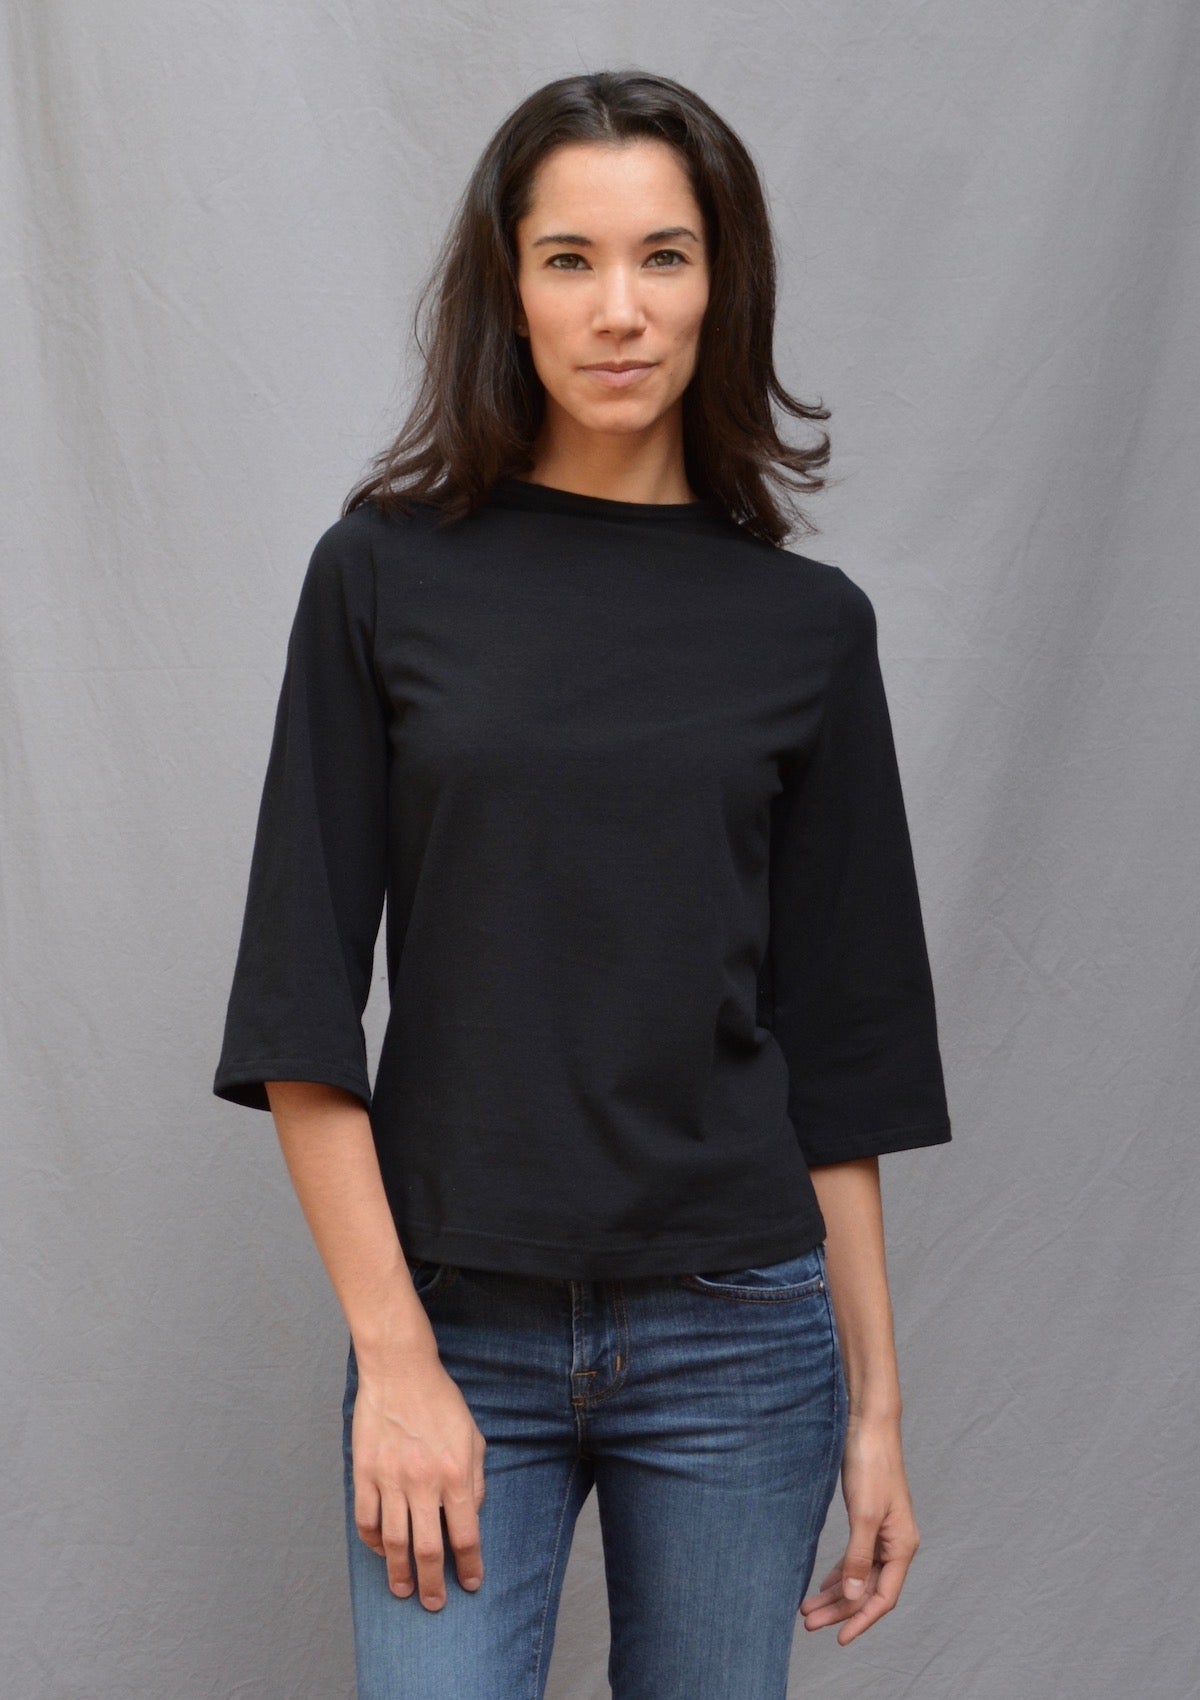 Opal Top, Fluted Sleeve